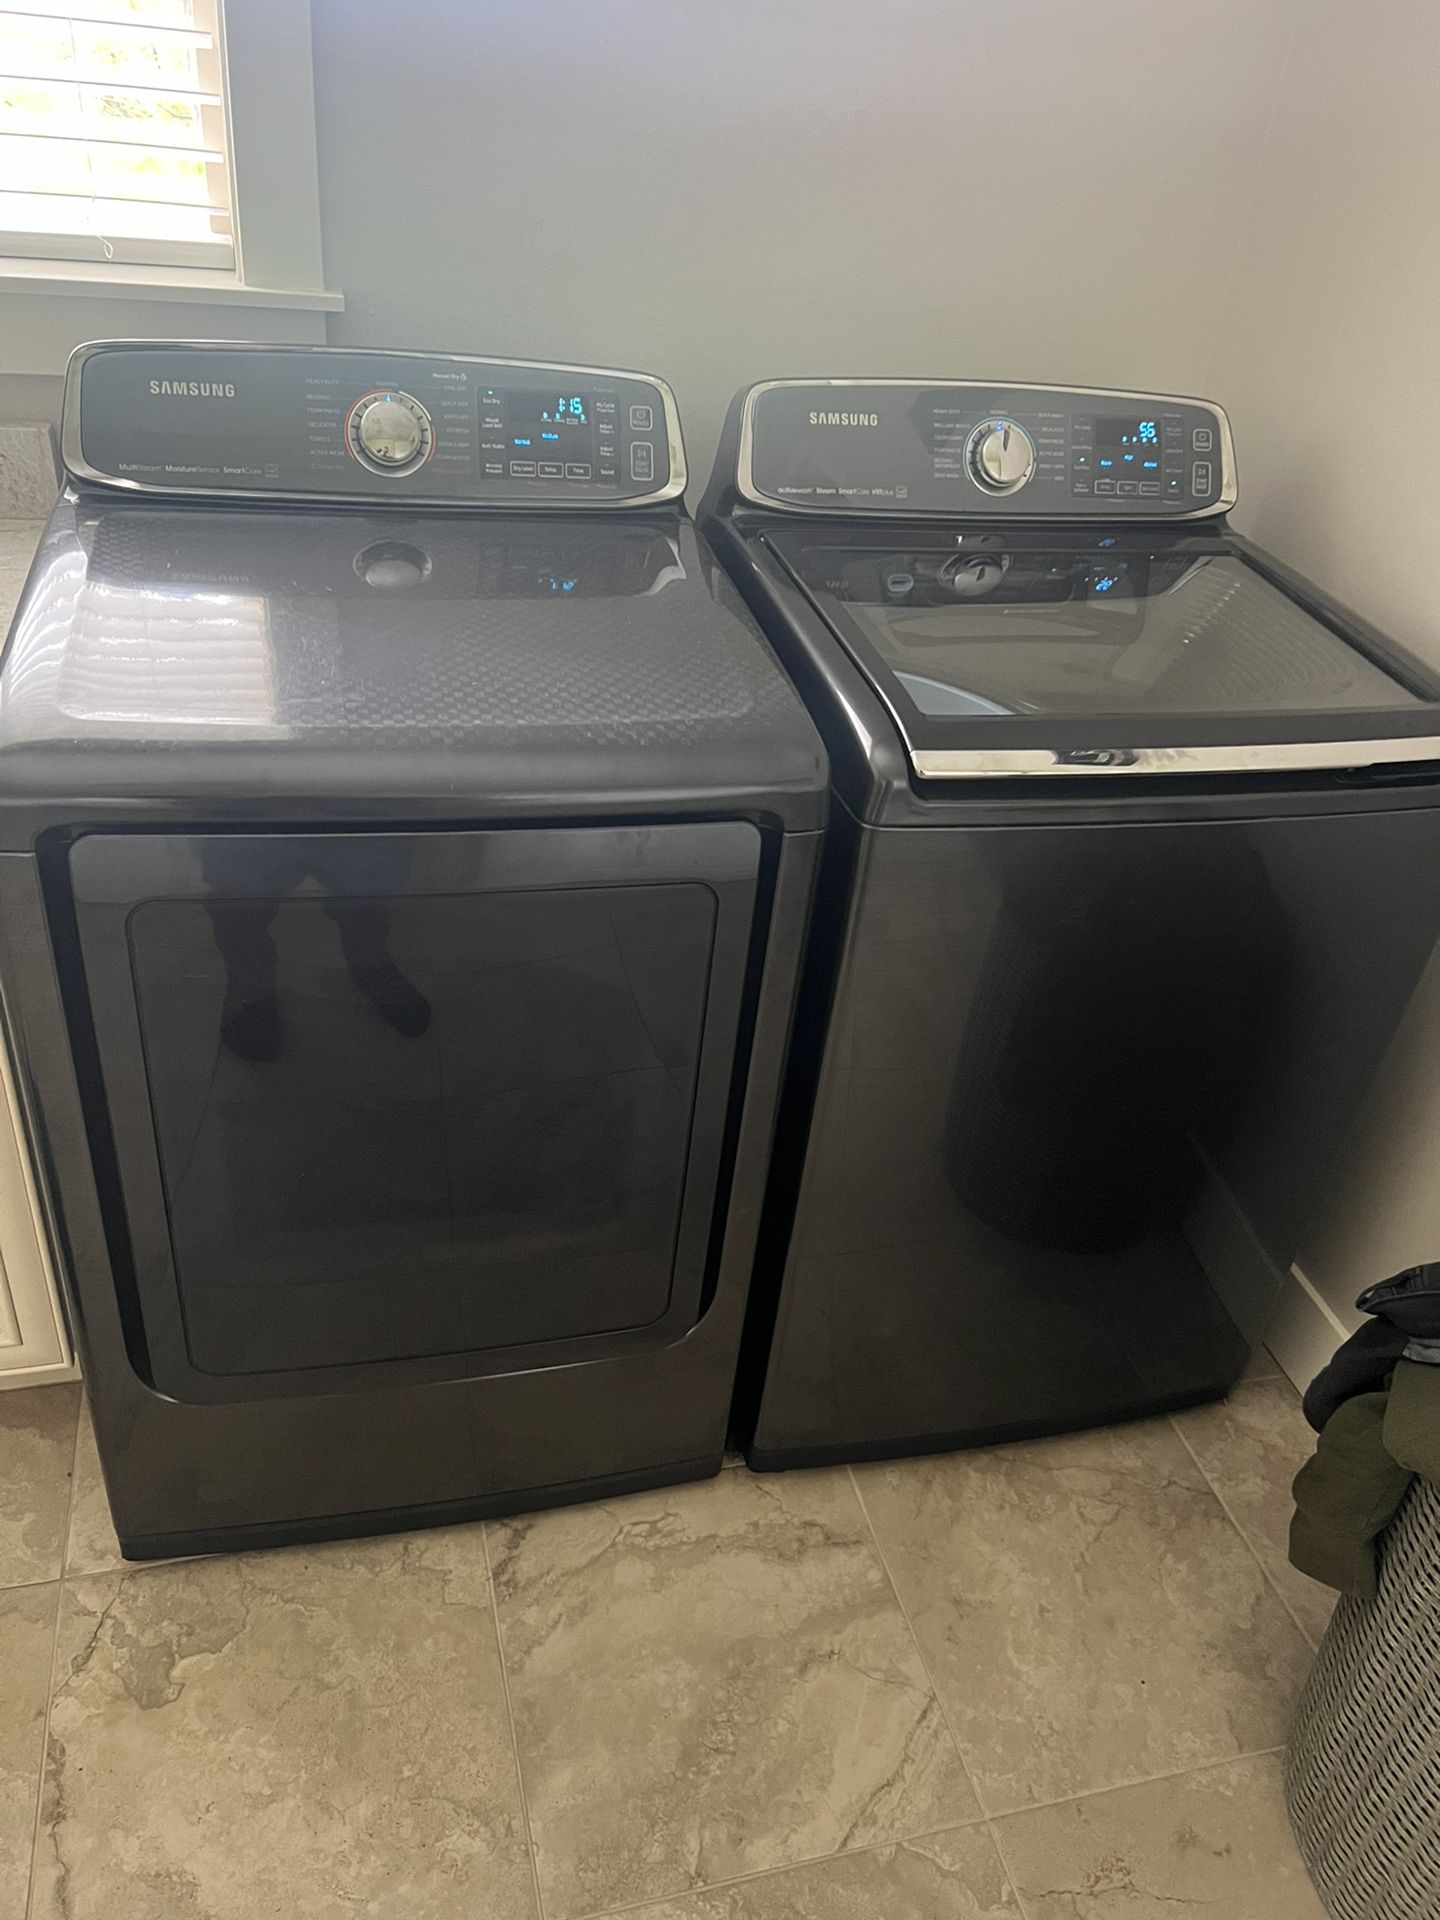 Large Samsung Washer And Gas Dryer 